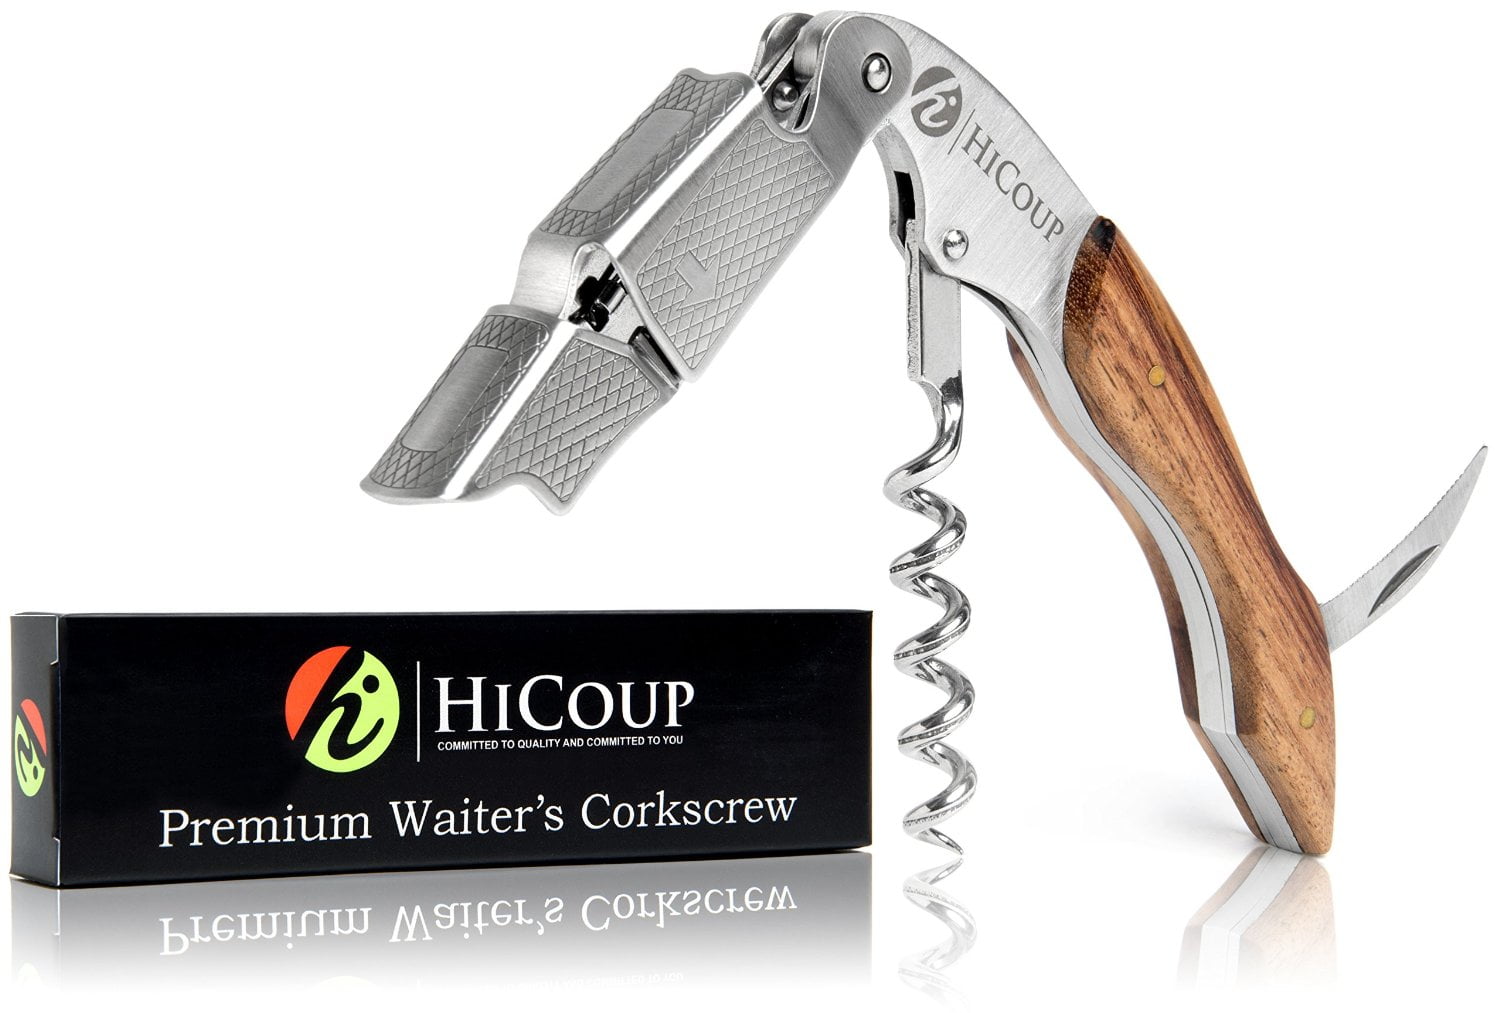 Professional Waiter’s Corkscrew by HiCoup Bottle Opener and Foil Cutter The Favored Choice of Sommeliers Bai Ying Wood Handle All-in-one Corkscrew Waiters and Bartenders Around The World 